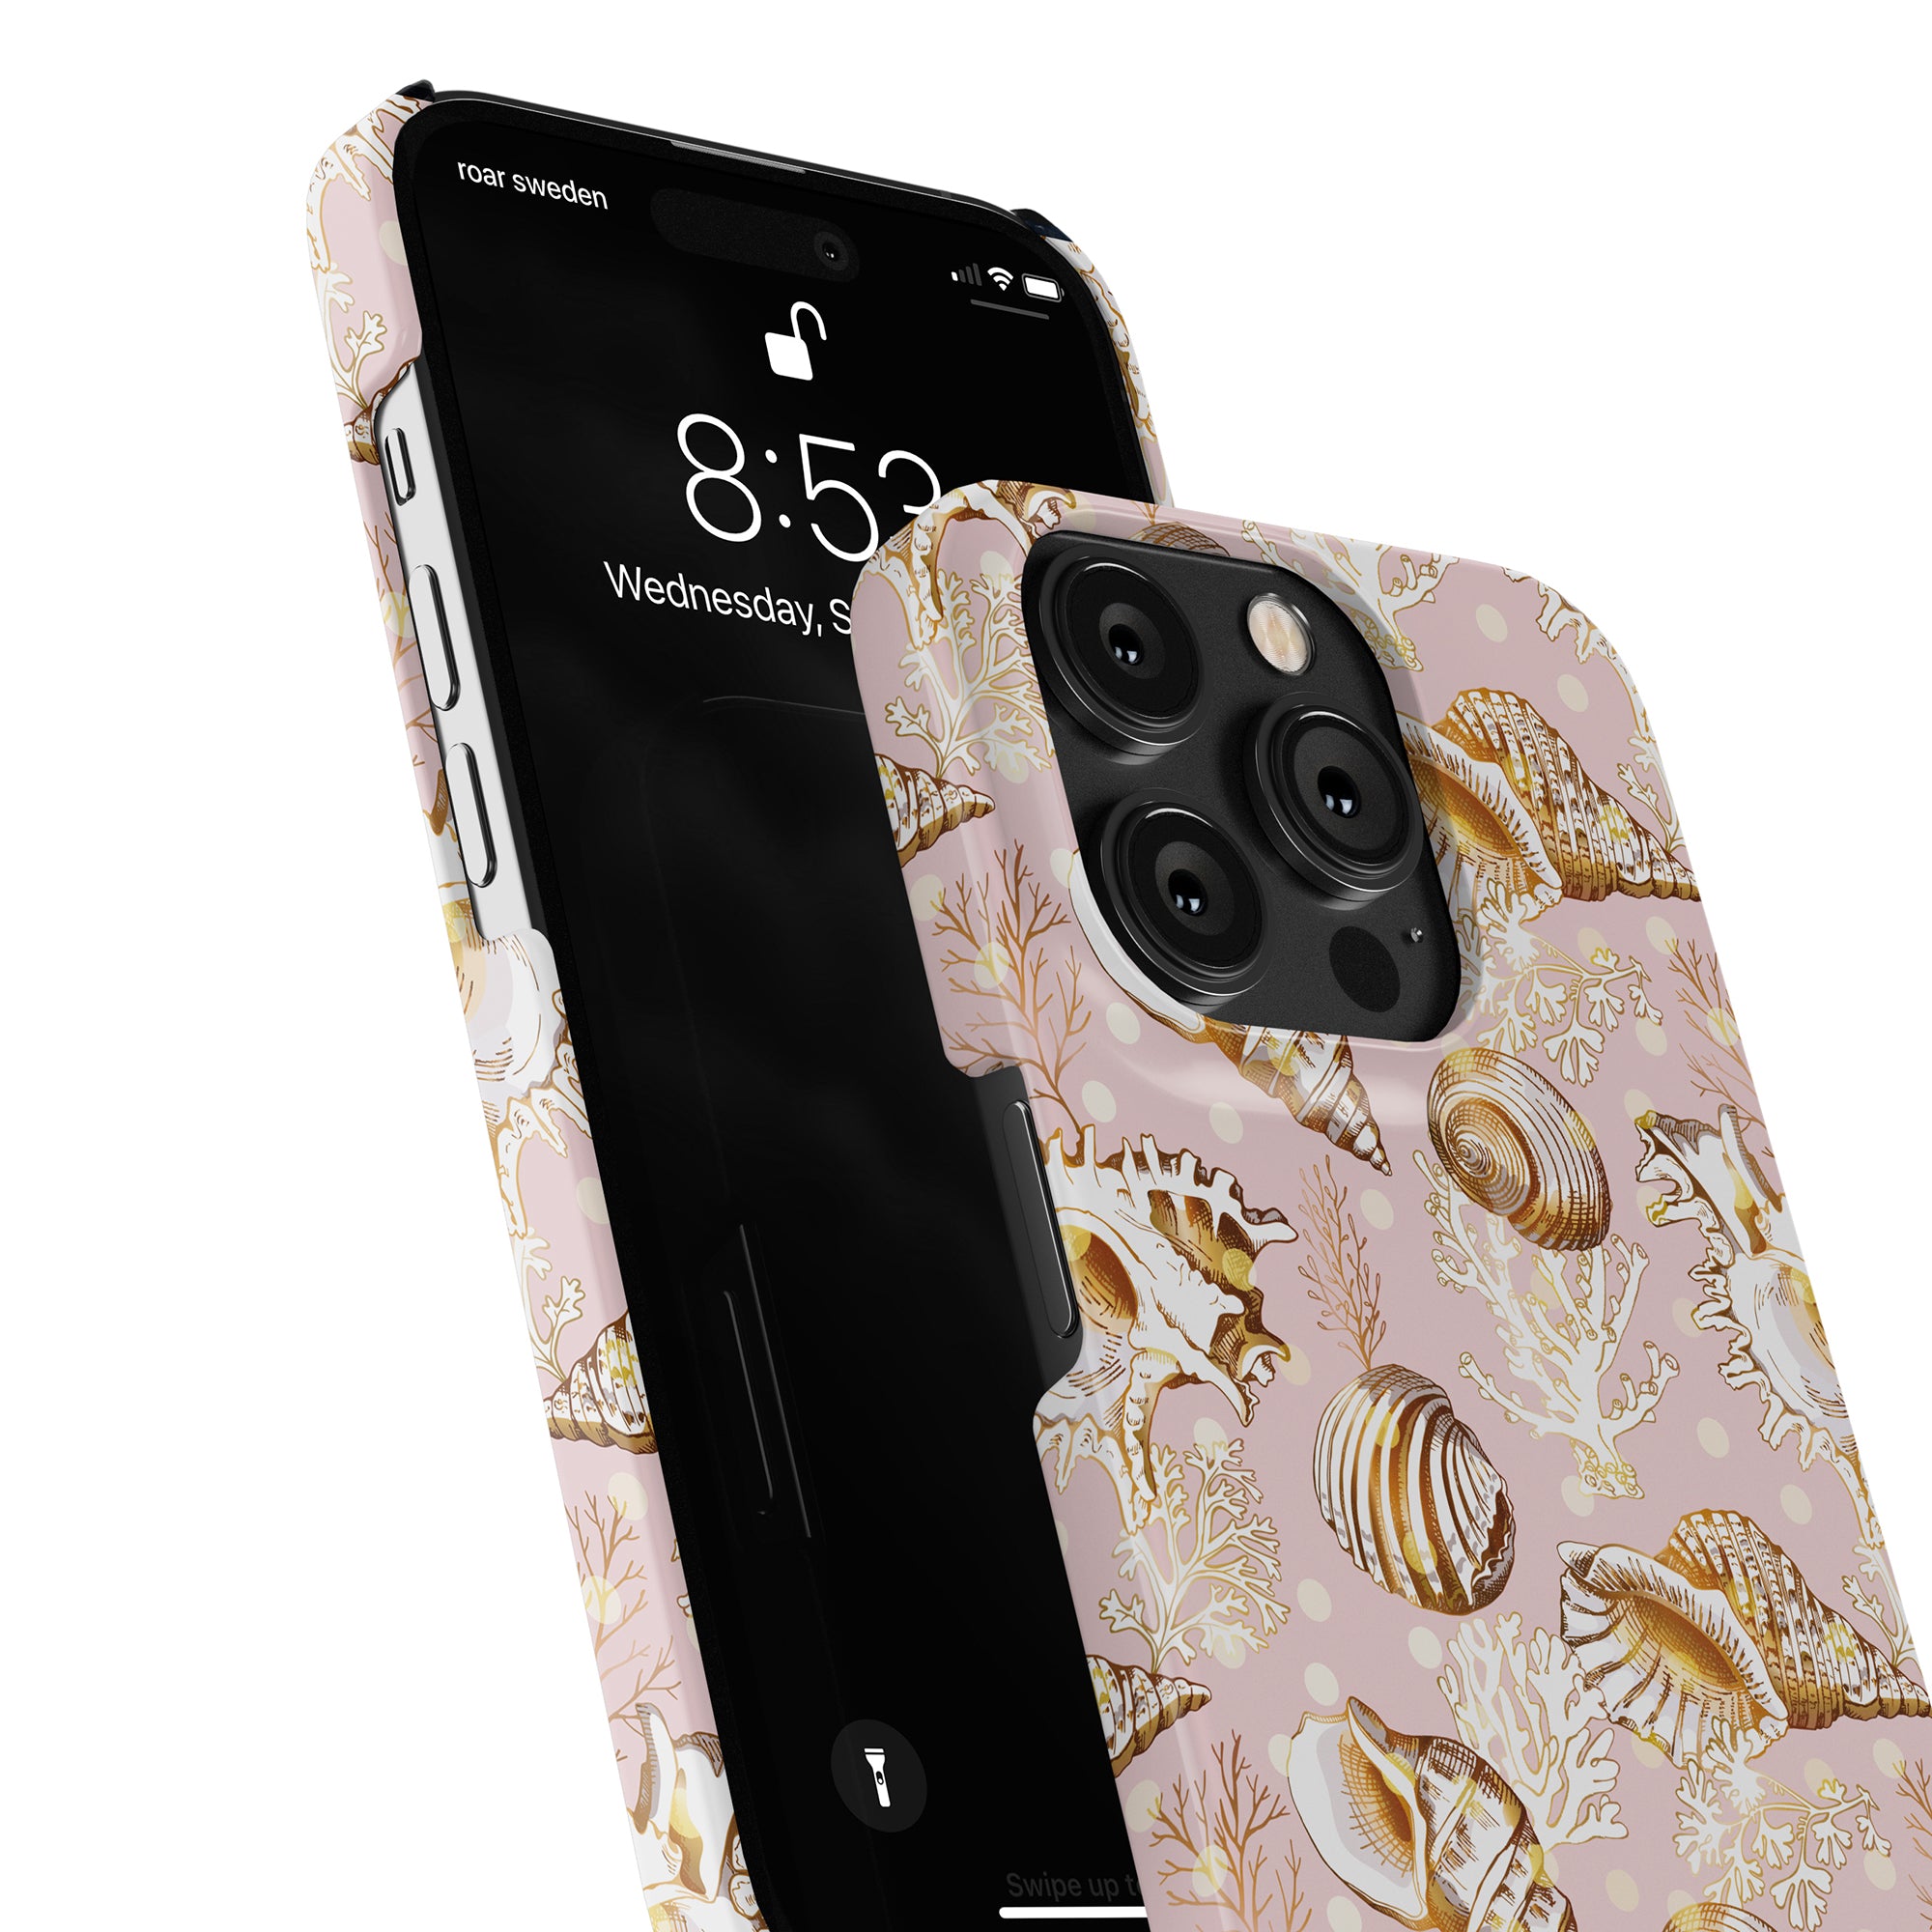 Two smartphones with Bivalvia patterned slim cases from the ocean collection, one displayed screen-on and the other screen-off, facing opposite directions.